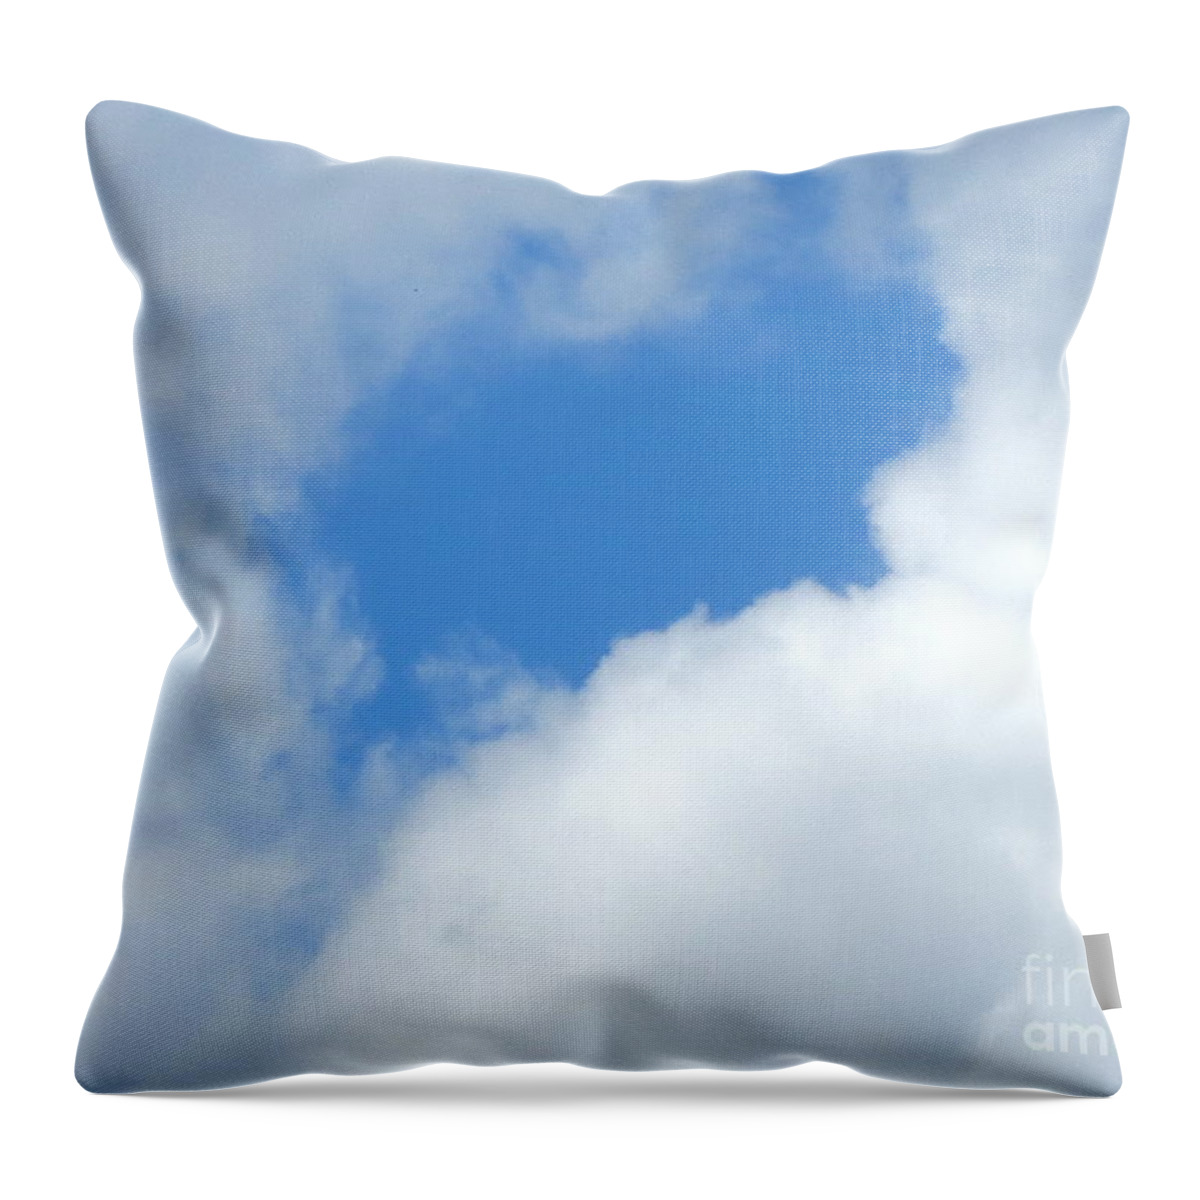 Clouds. Facial Profile In Blue. Throw Pillow featuring the photograph Clouds. Facial profile in blue. by Robert Birkenes